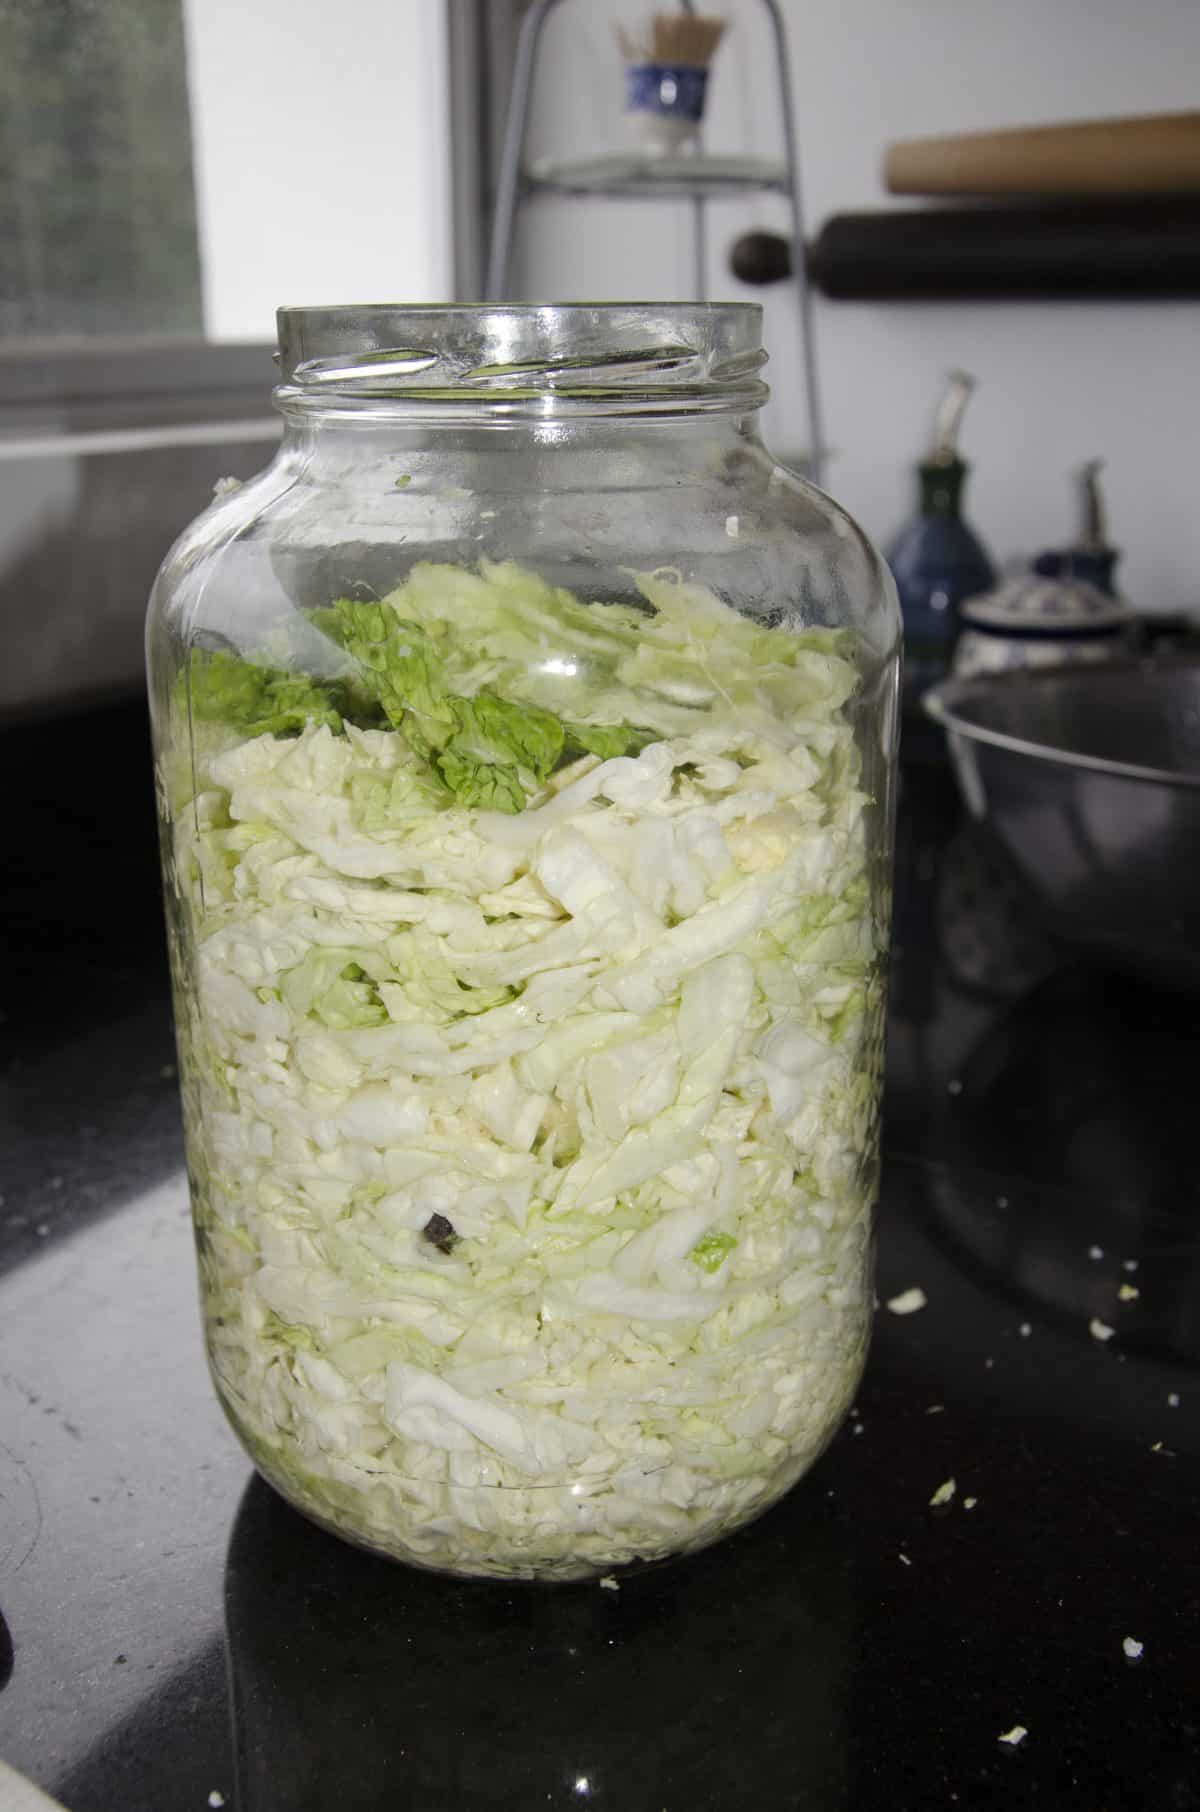 Whole cabbage leaves on top of the future kraut. Pressing down helped push out more liquid from the cabbage.